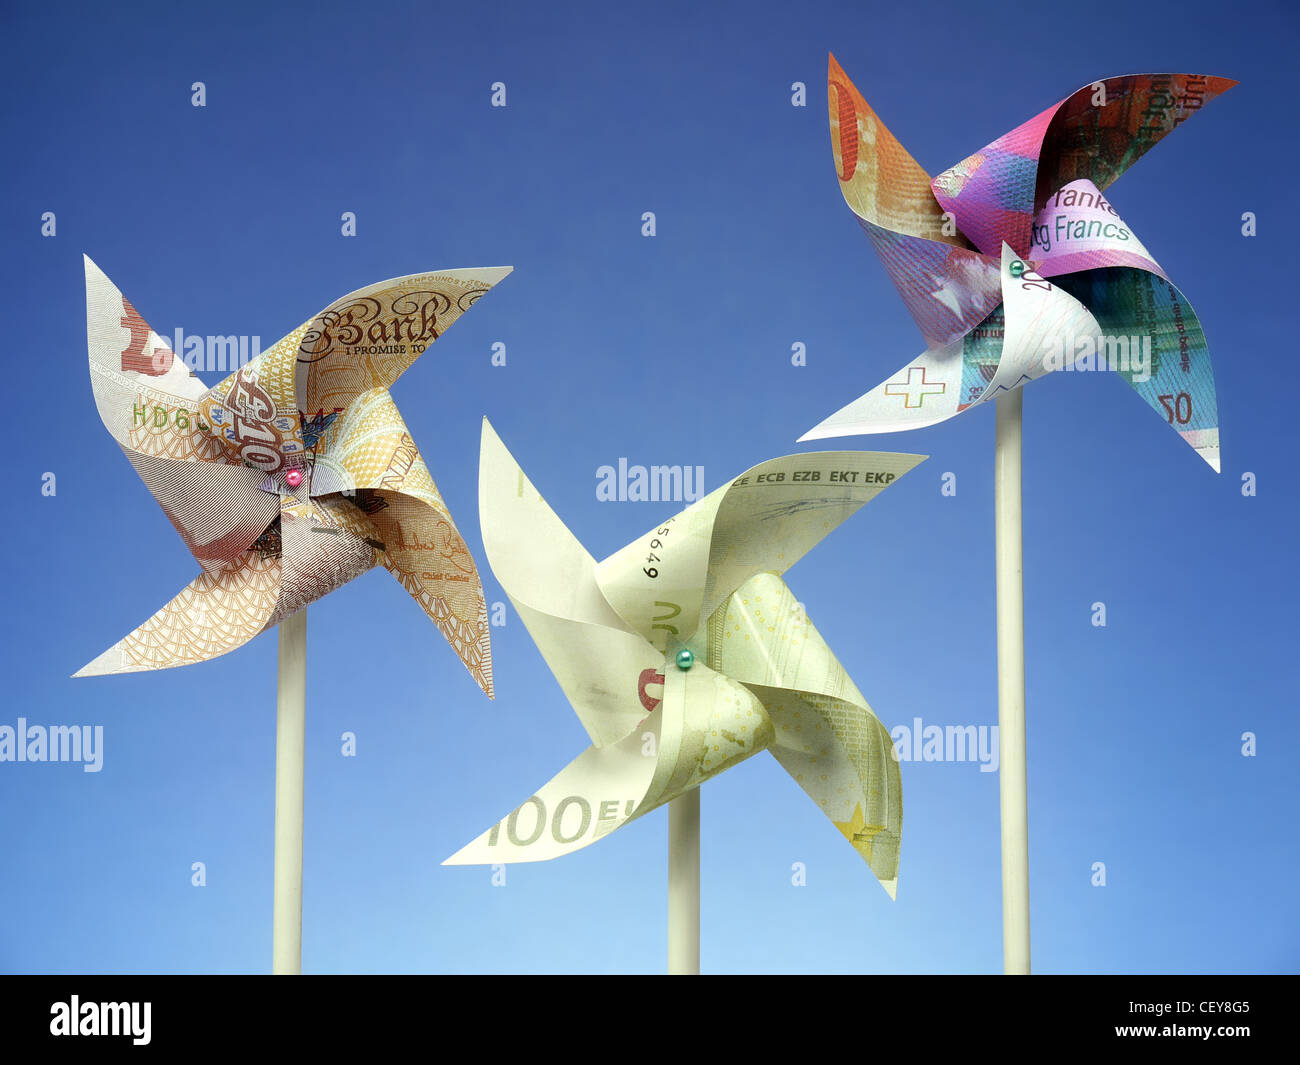 Three major European currency banknotes - Euro, Swiss Franc and British Pound cut into toy windmills shot on blue background Stock Photo